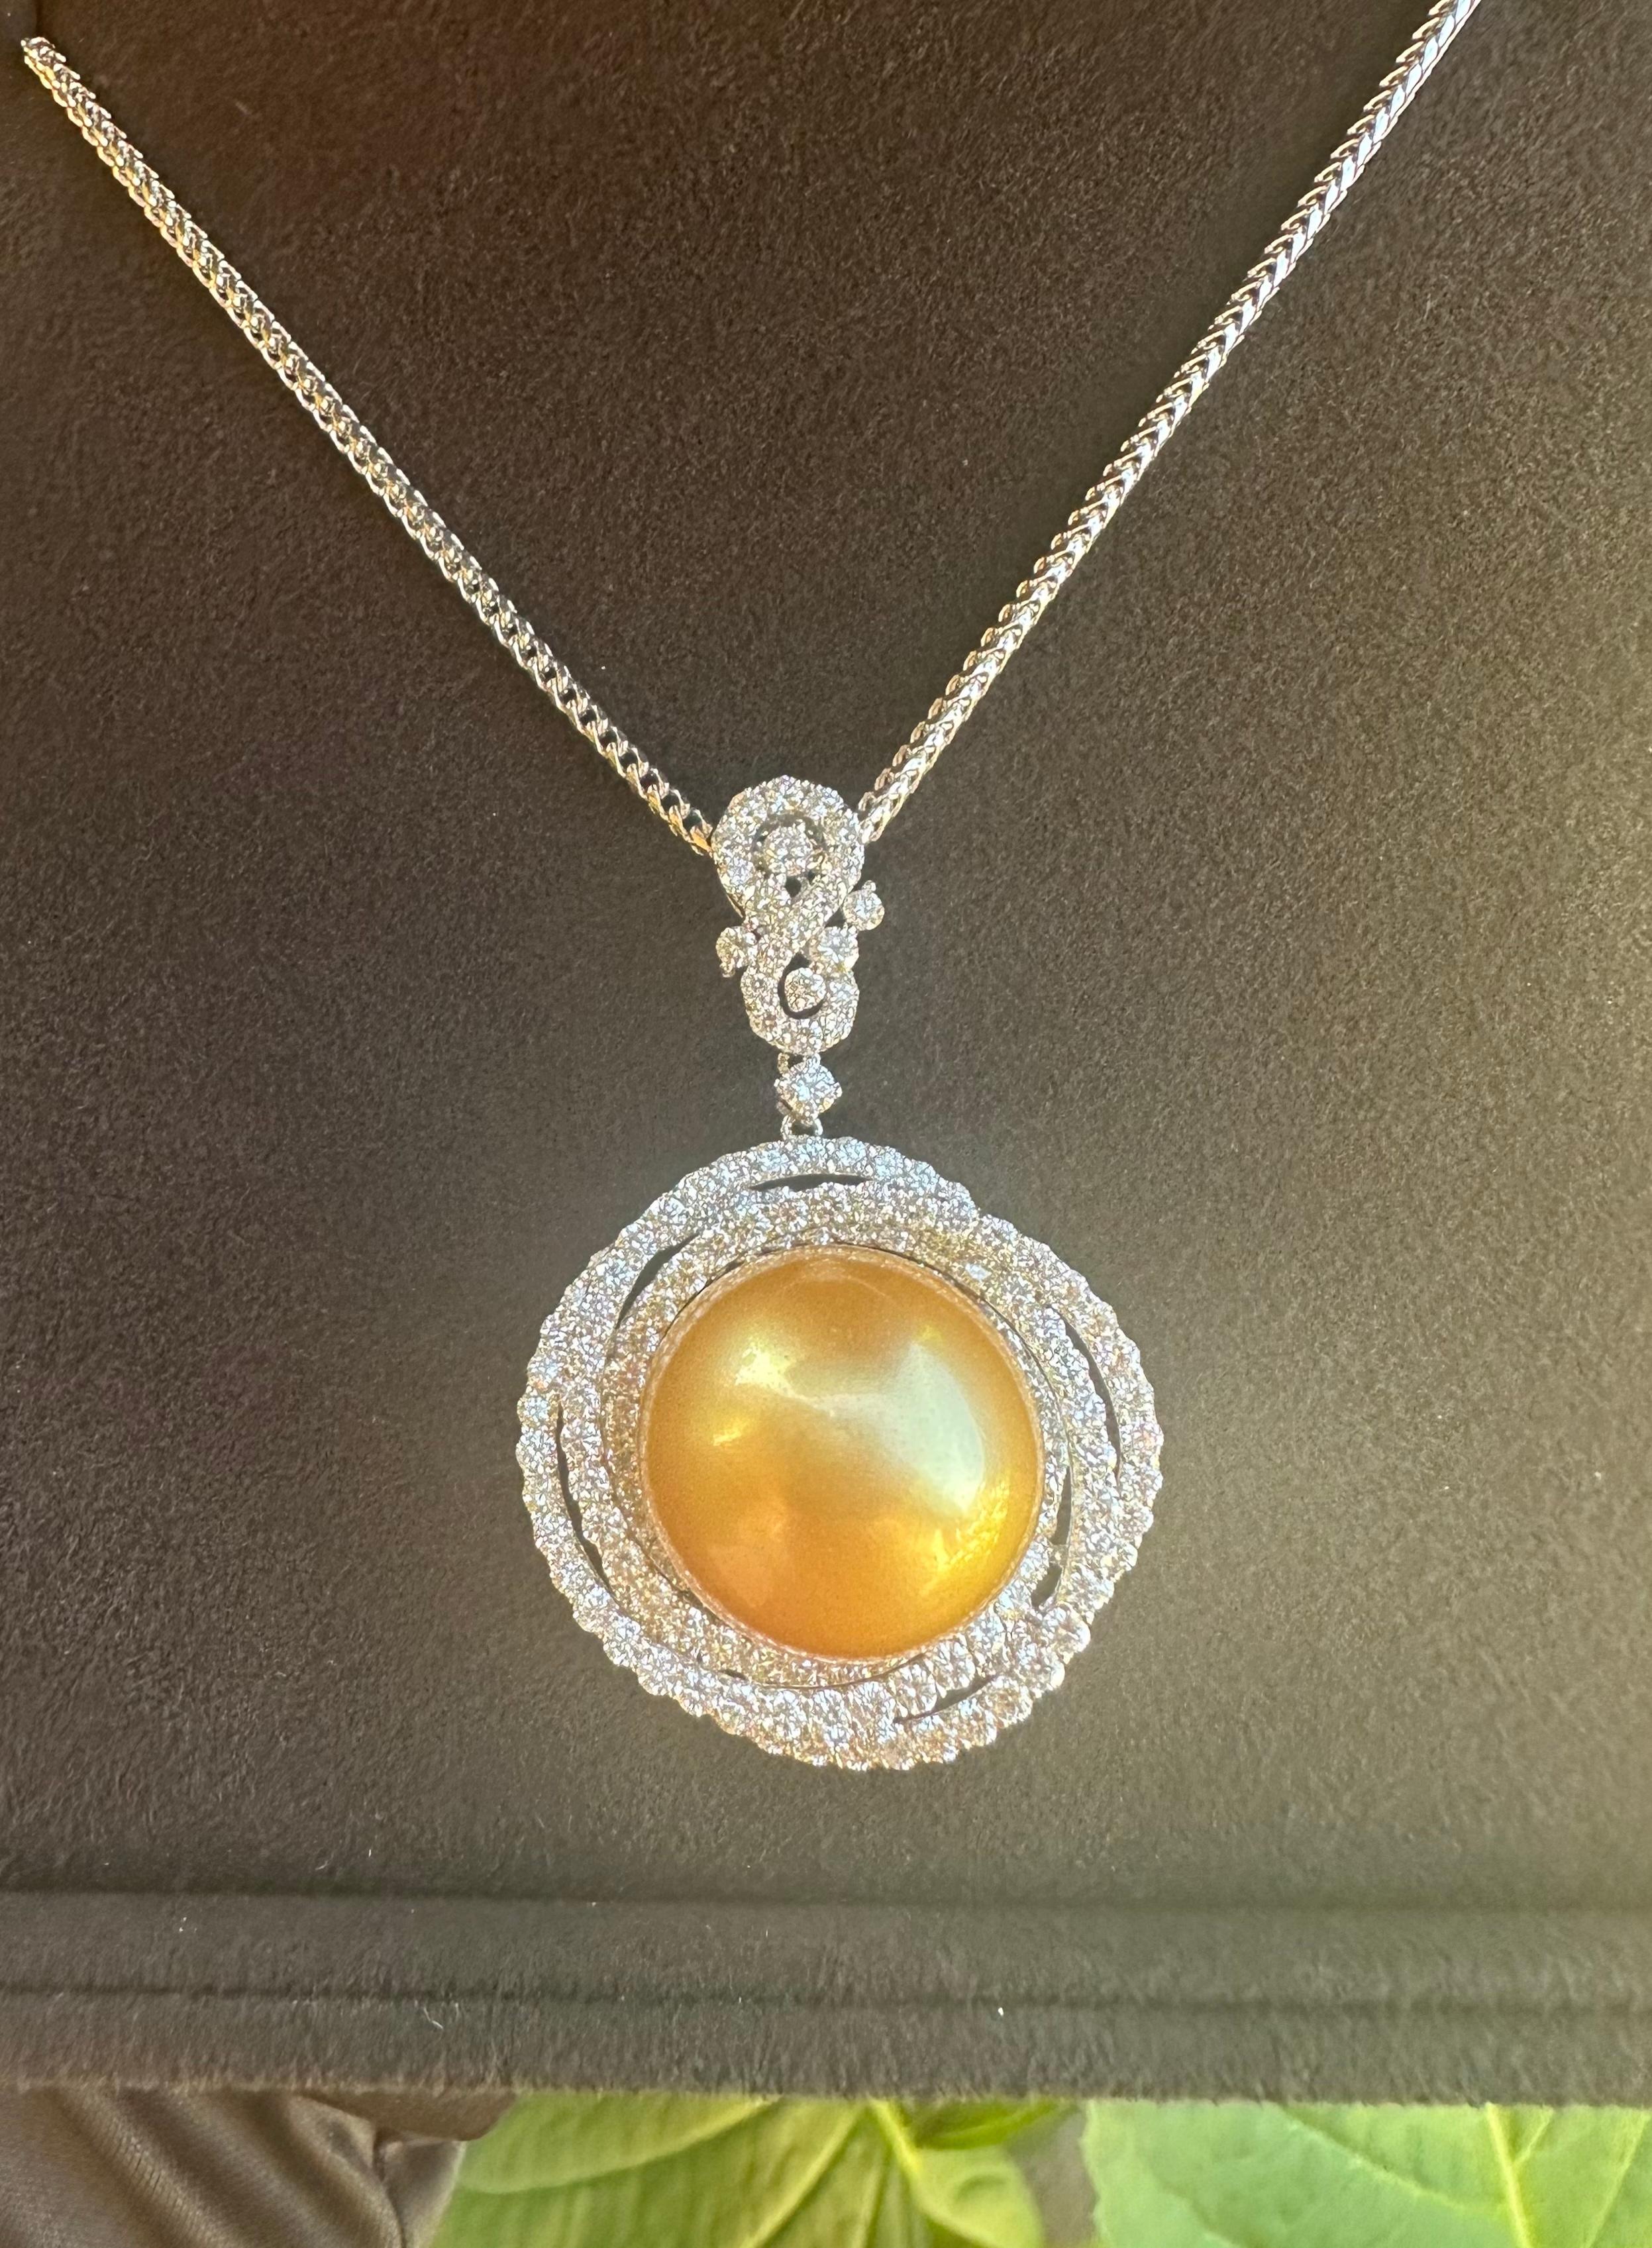 Magnificent, huge, single round AAAA grade finest quality 16.75 mm golden South Sea pearl, with high luster and shine, is surrounded by approximately 206 round brilliant diamonds in an 18 karat white gold pendant mounting. This pendant is